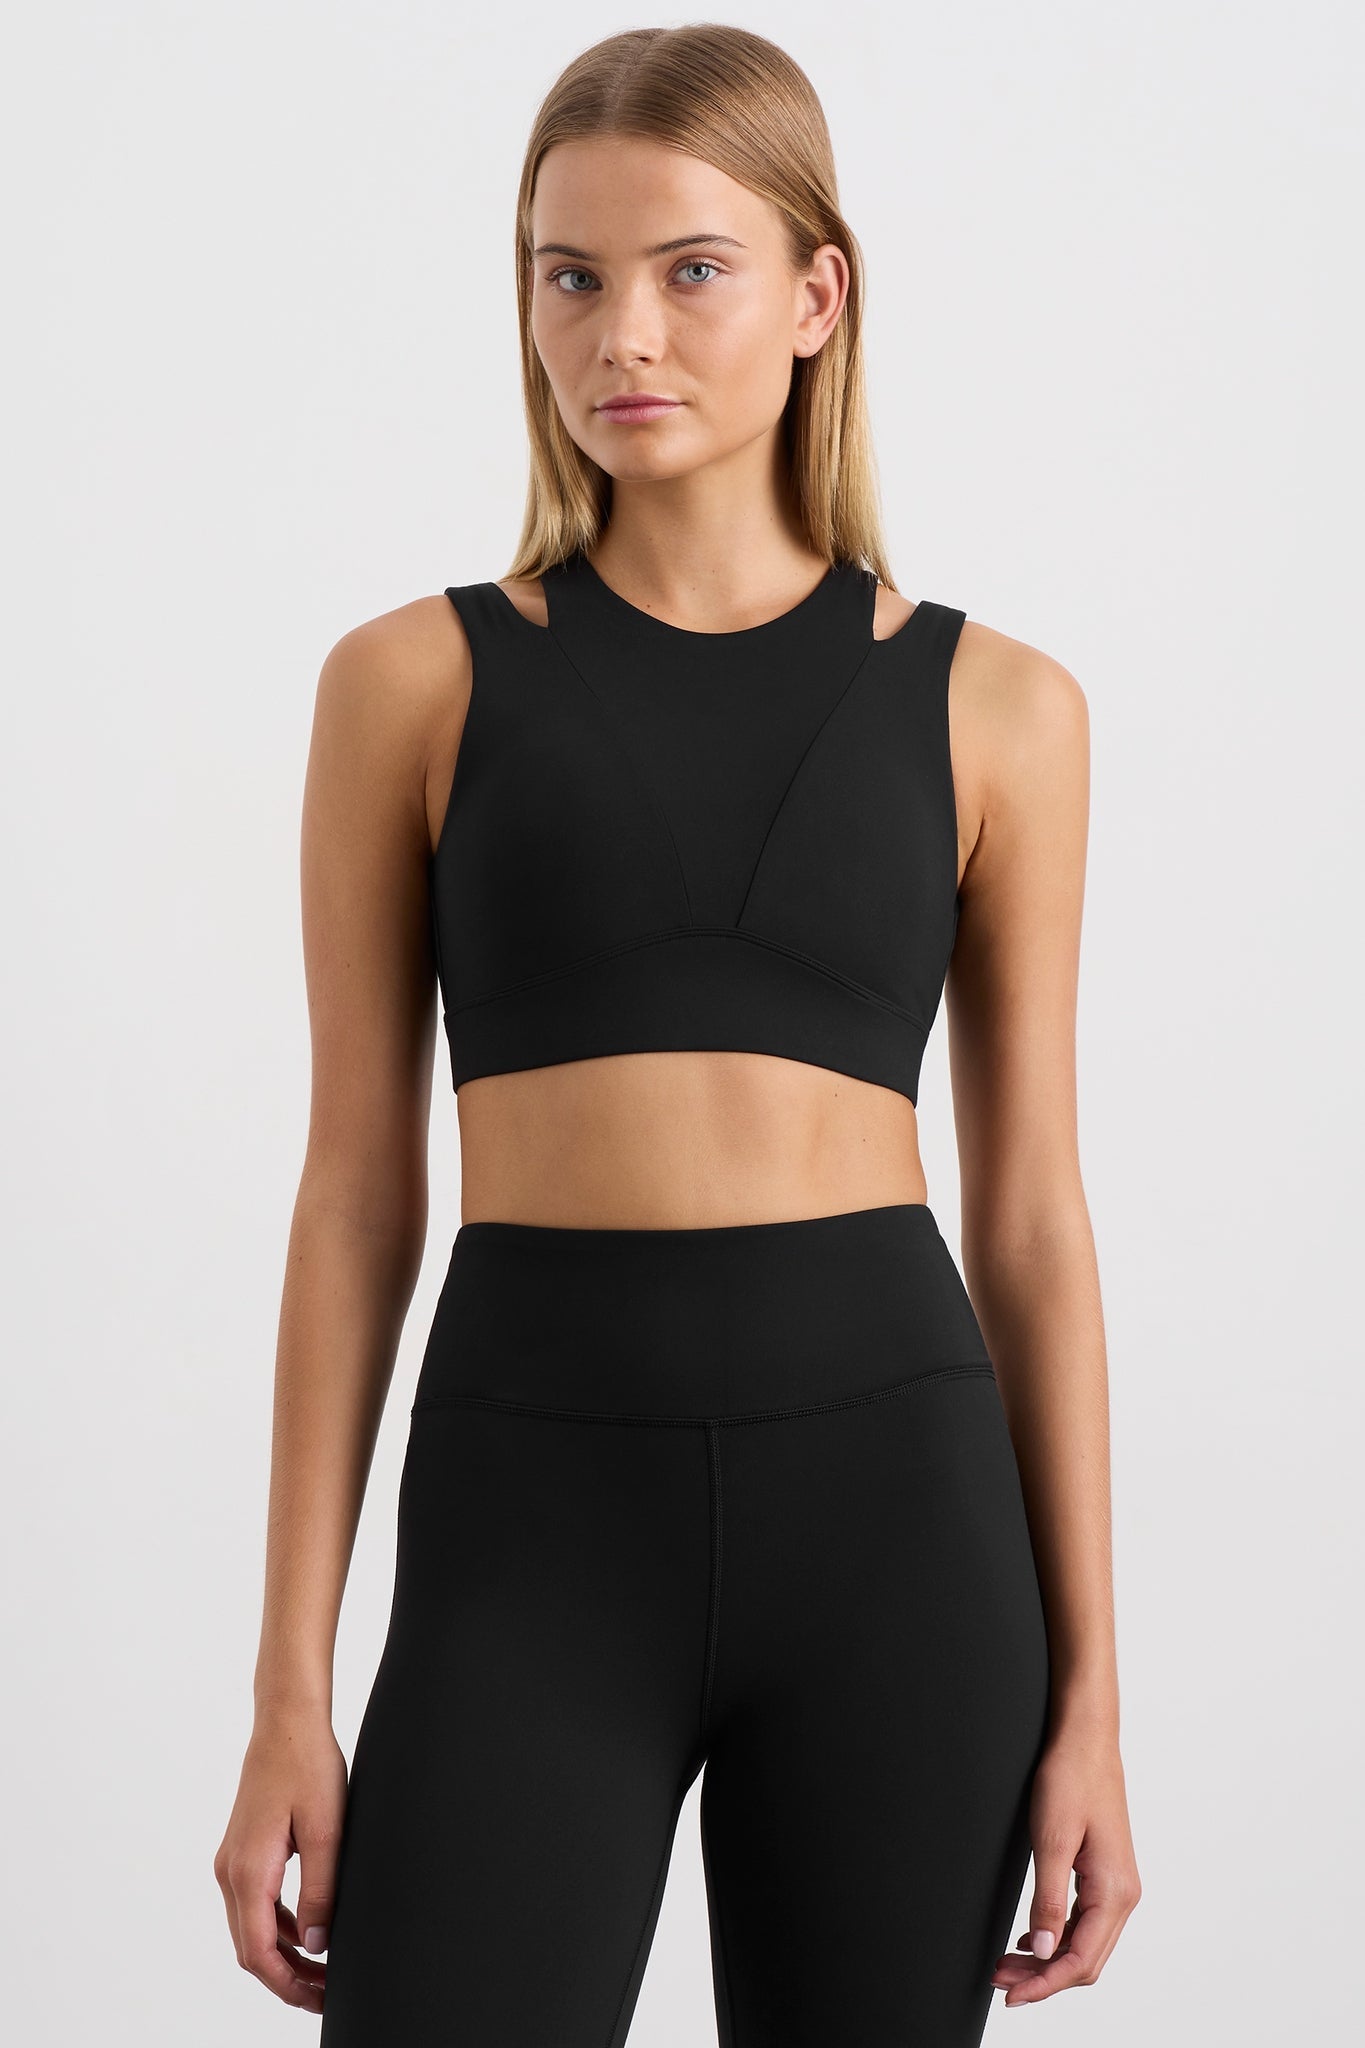 Lululemon Black Strappy Cutout Mesh Two Layer Supportive Athletic